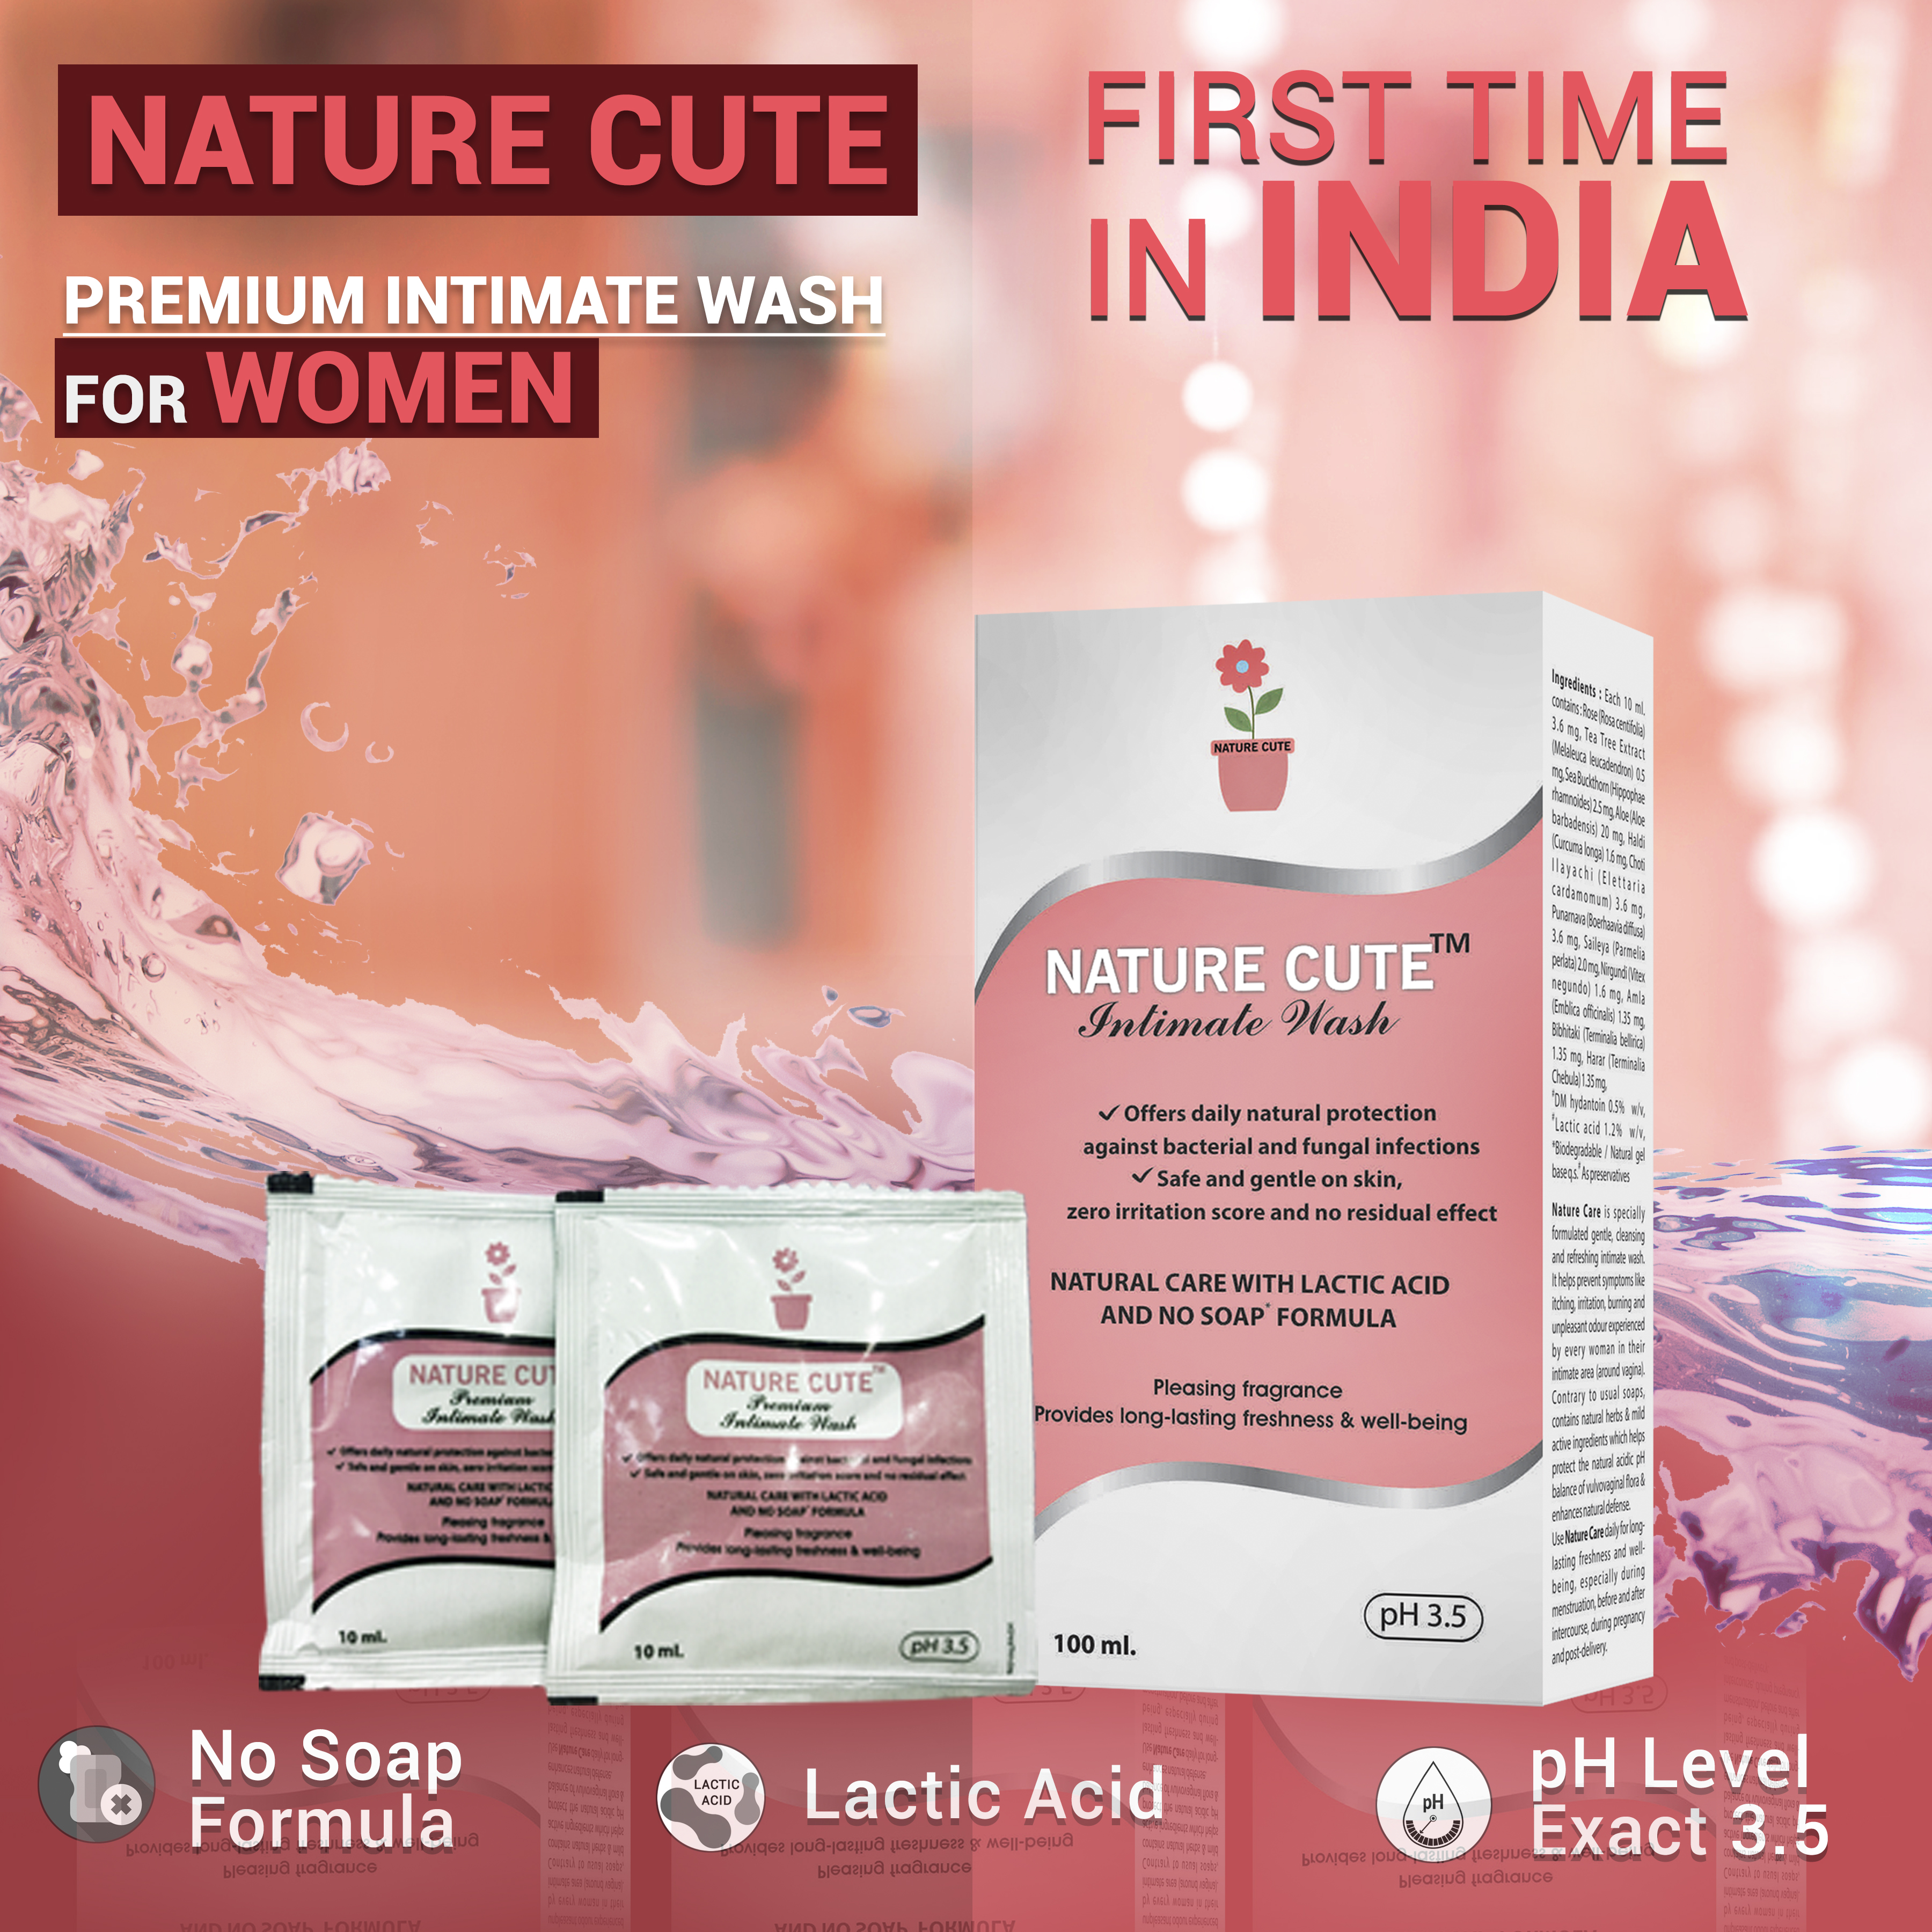 Take care of intimate hygiene with natural intimate wash